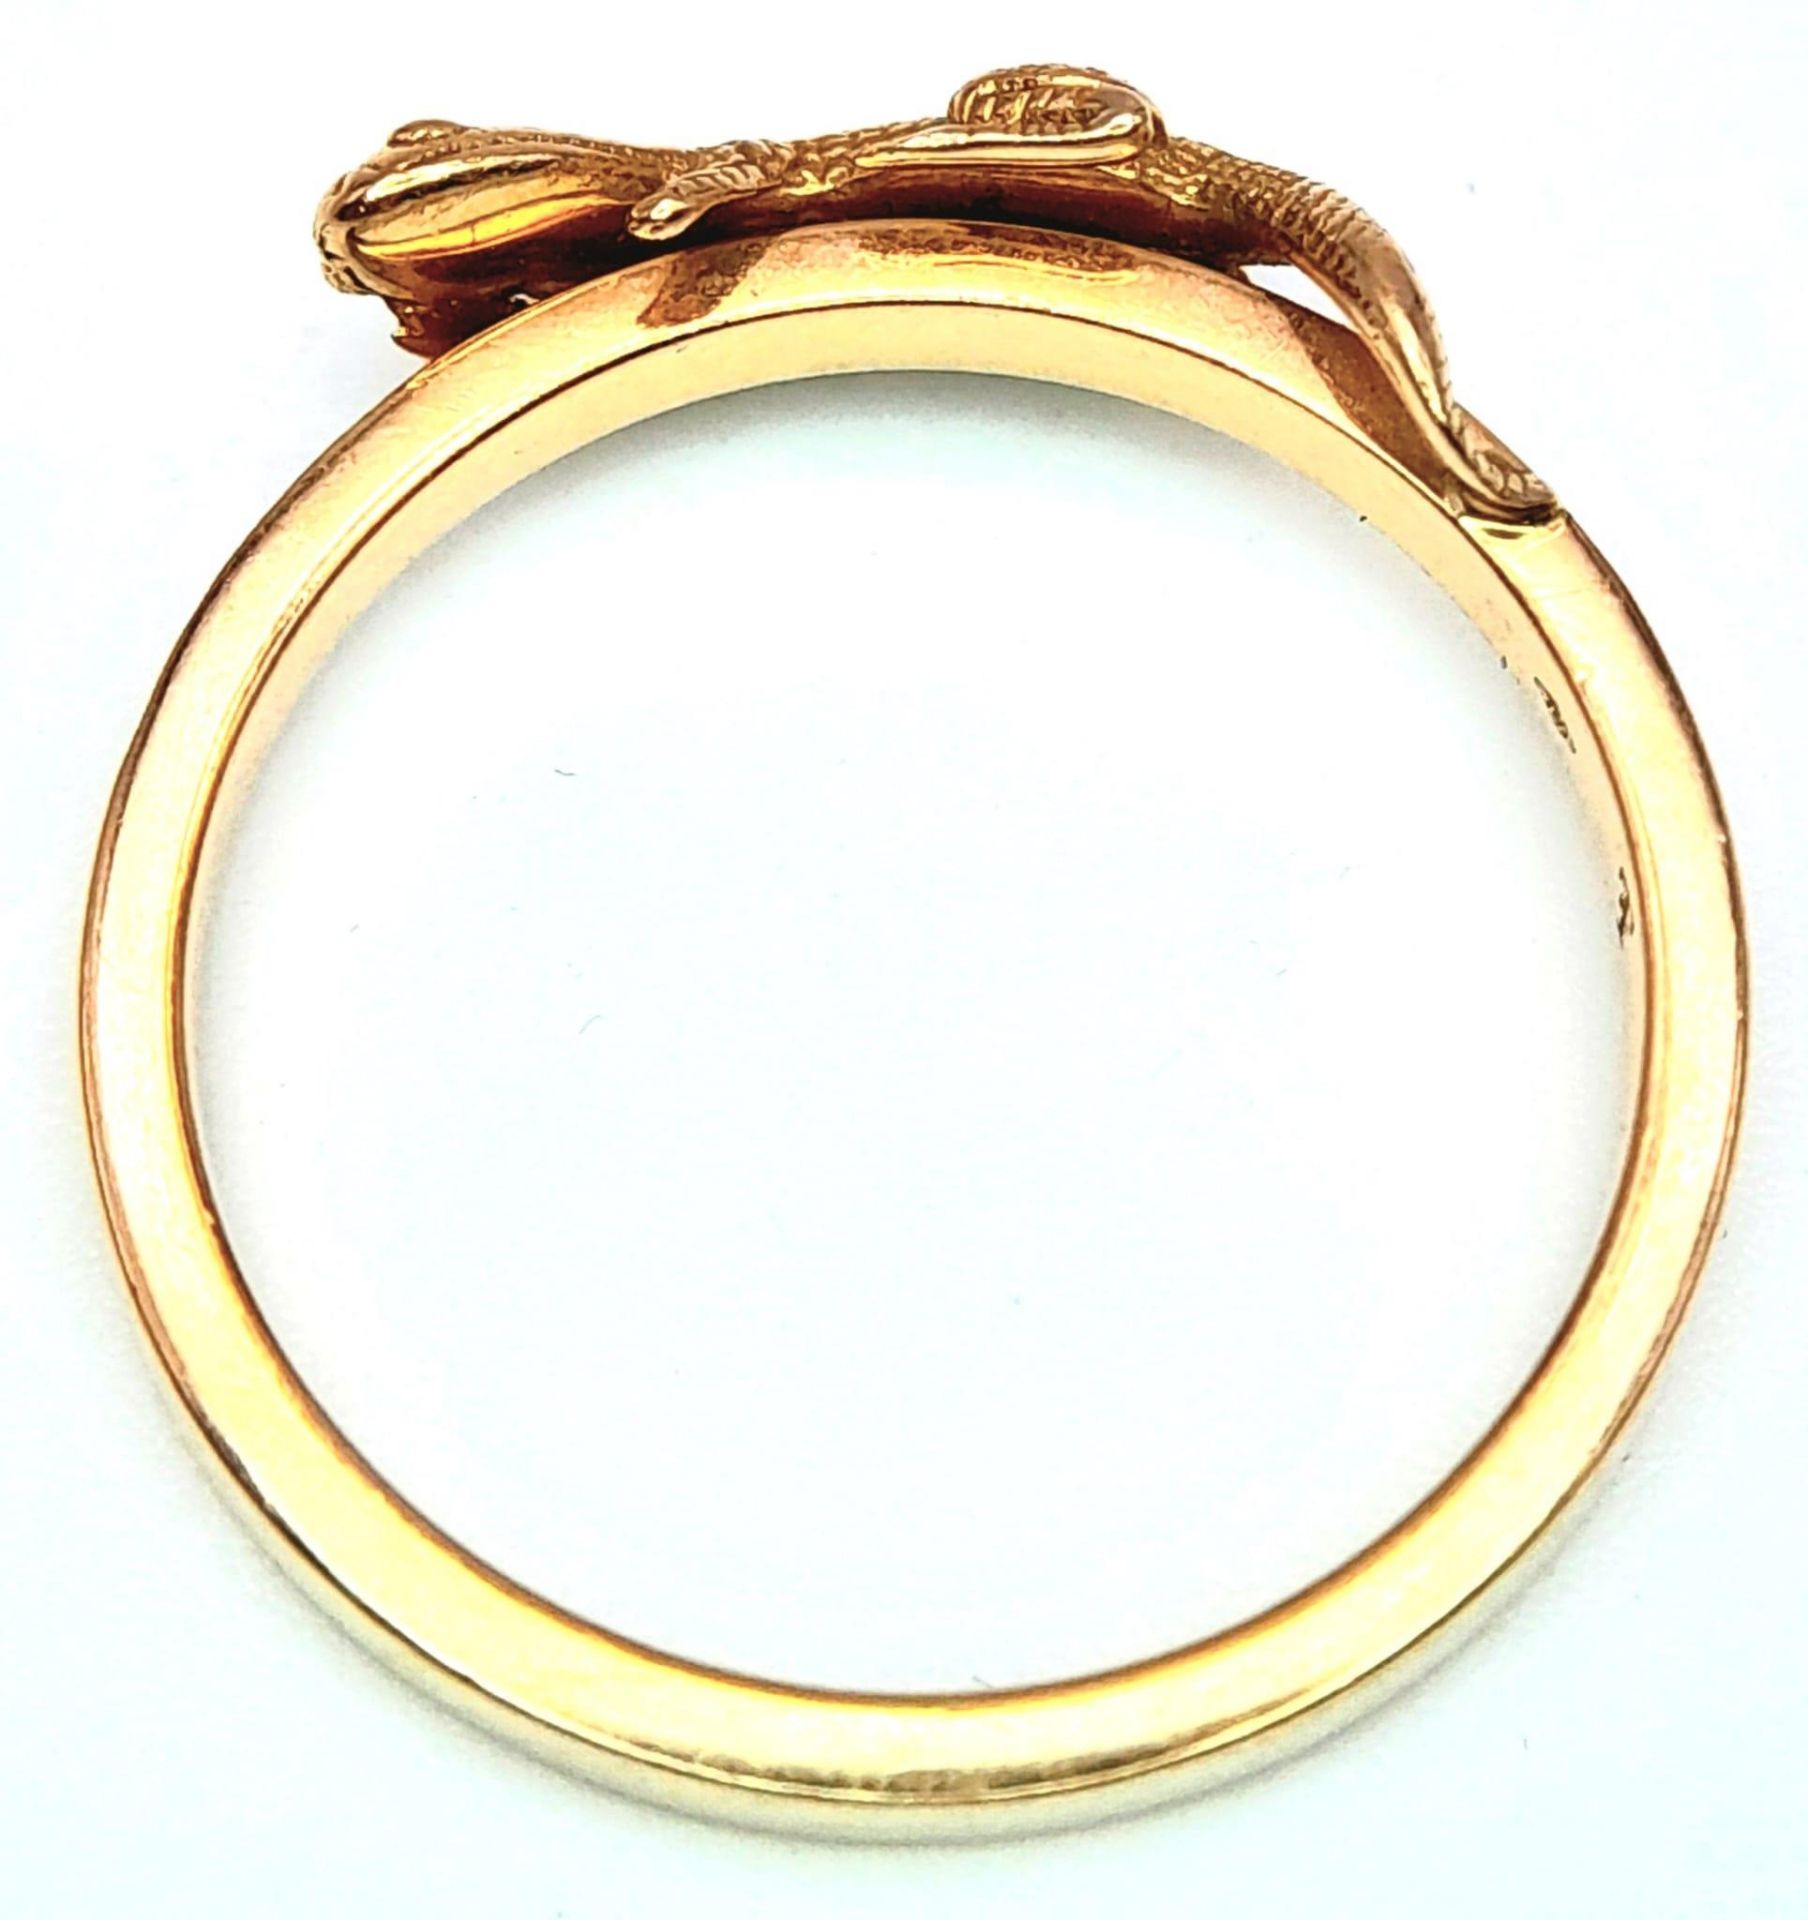 AN 18K YELLOW GOLD, THEO FENNELL (DESIGNER) DIAMOND SET LIZARD RING. 3G. SIZE M - Image 5 of 6